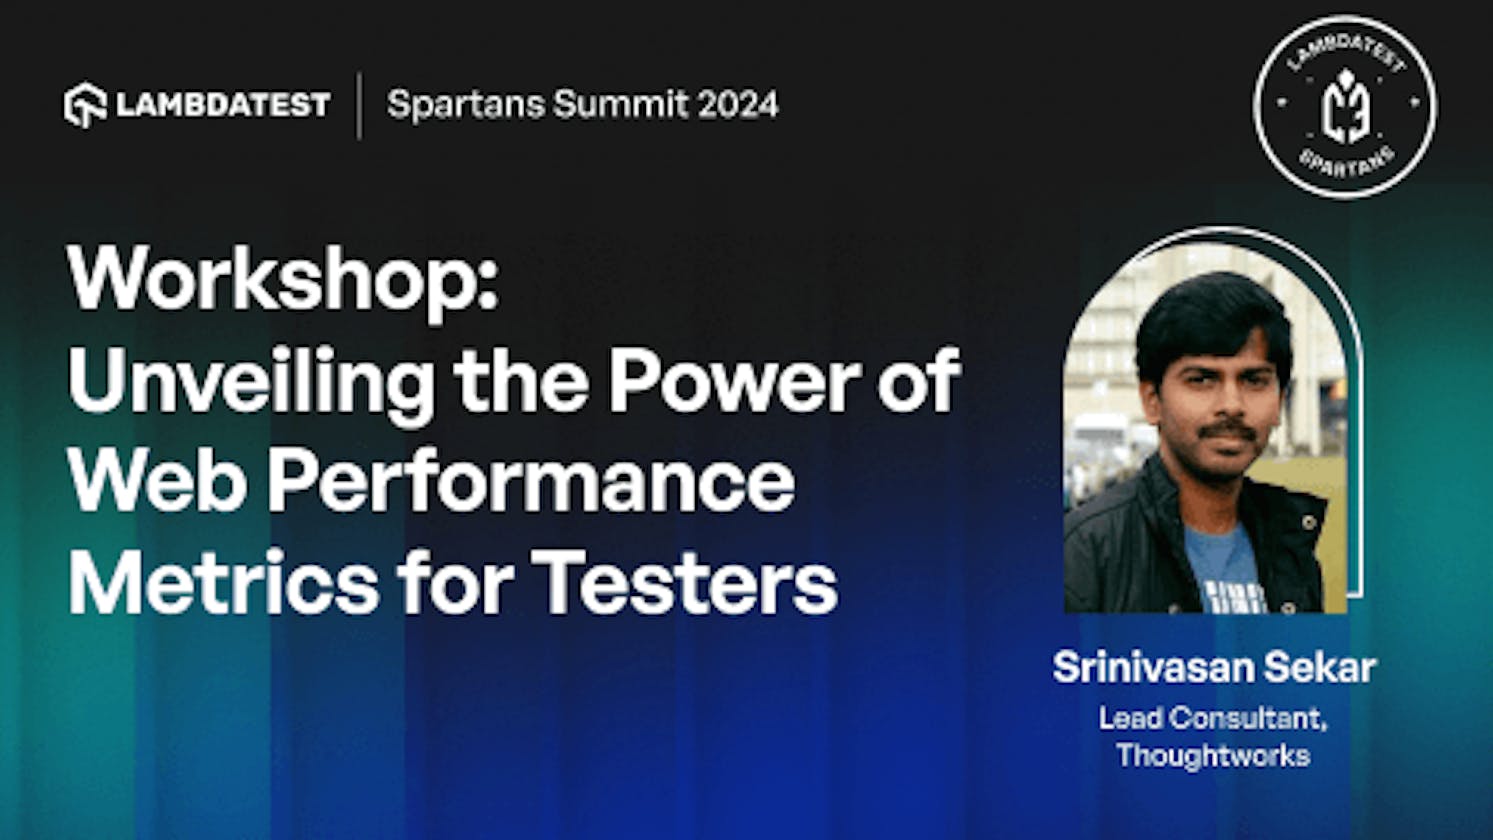 Workshop: Unveiling the Power of Web Performance Metrics for Testers [Spartans Summit 2024]